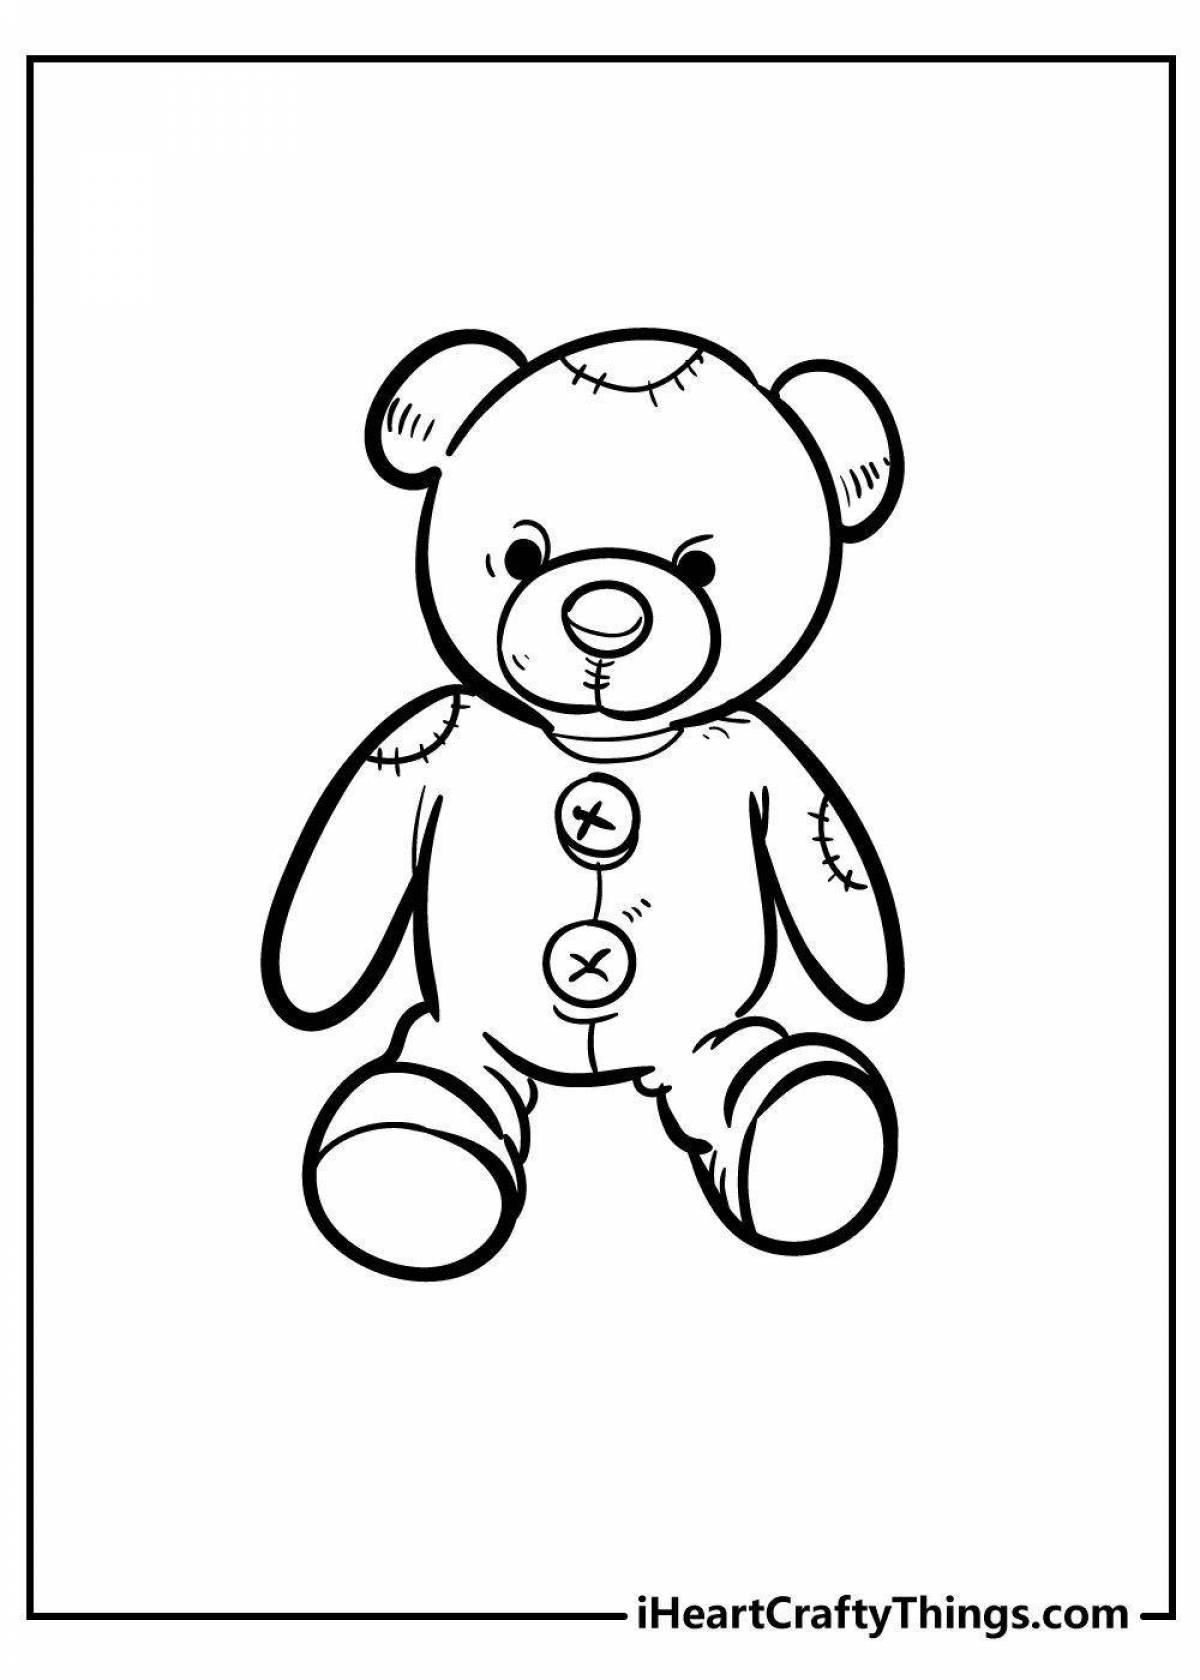 Coloring page adorable gummy bear